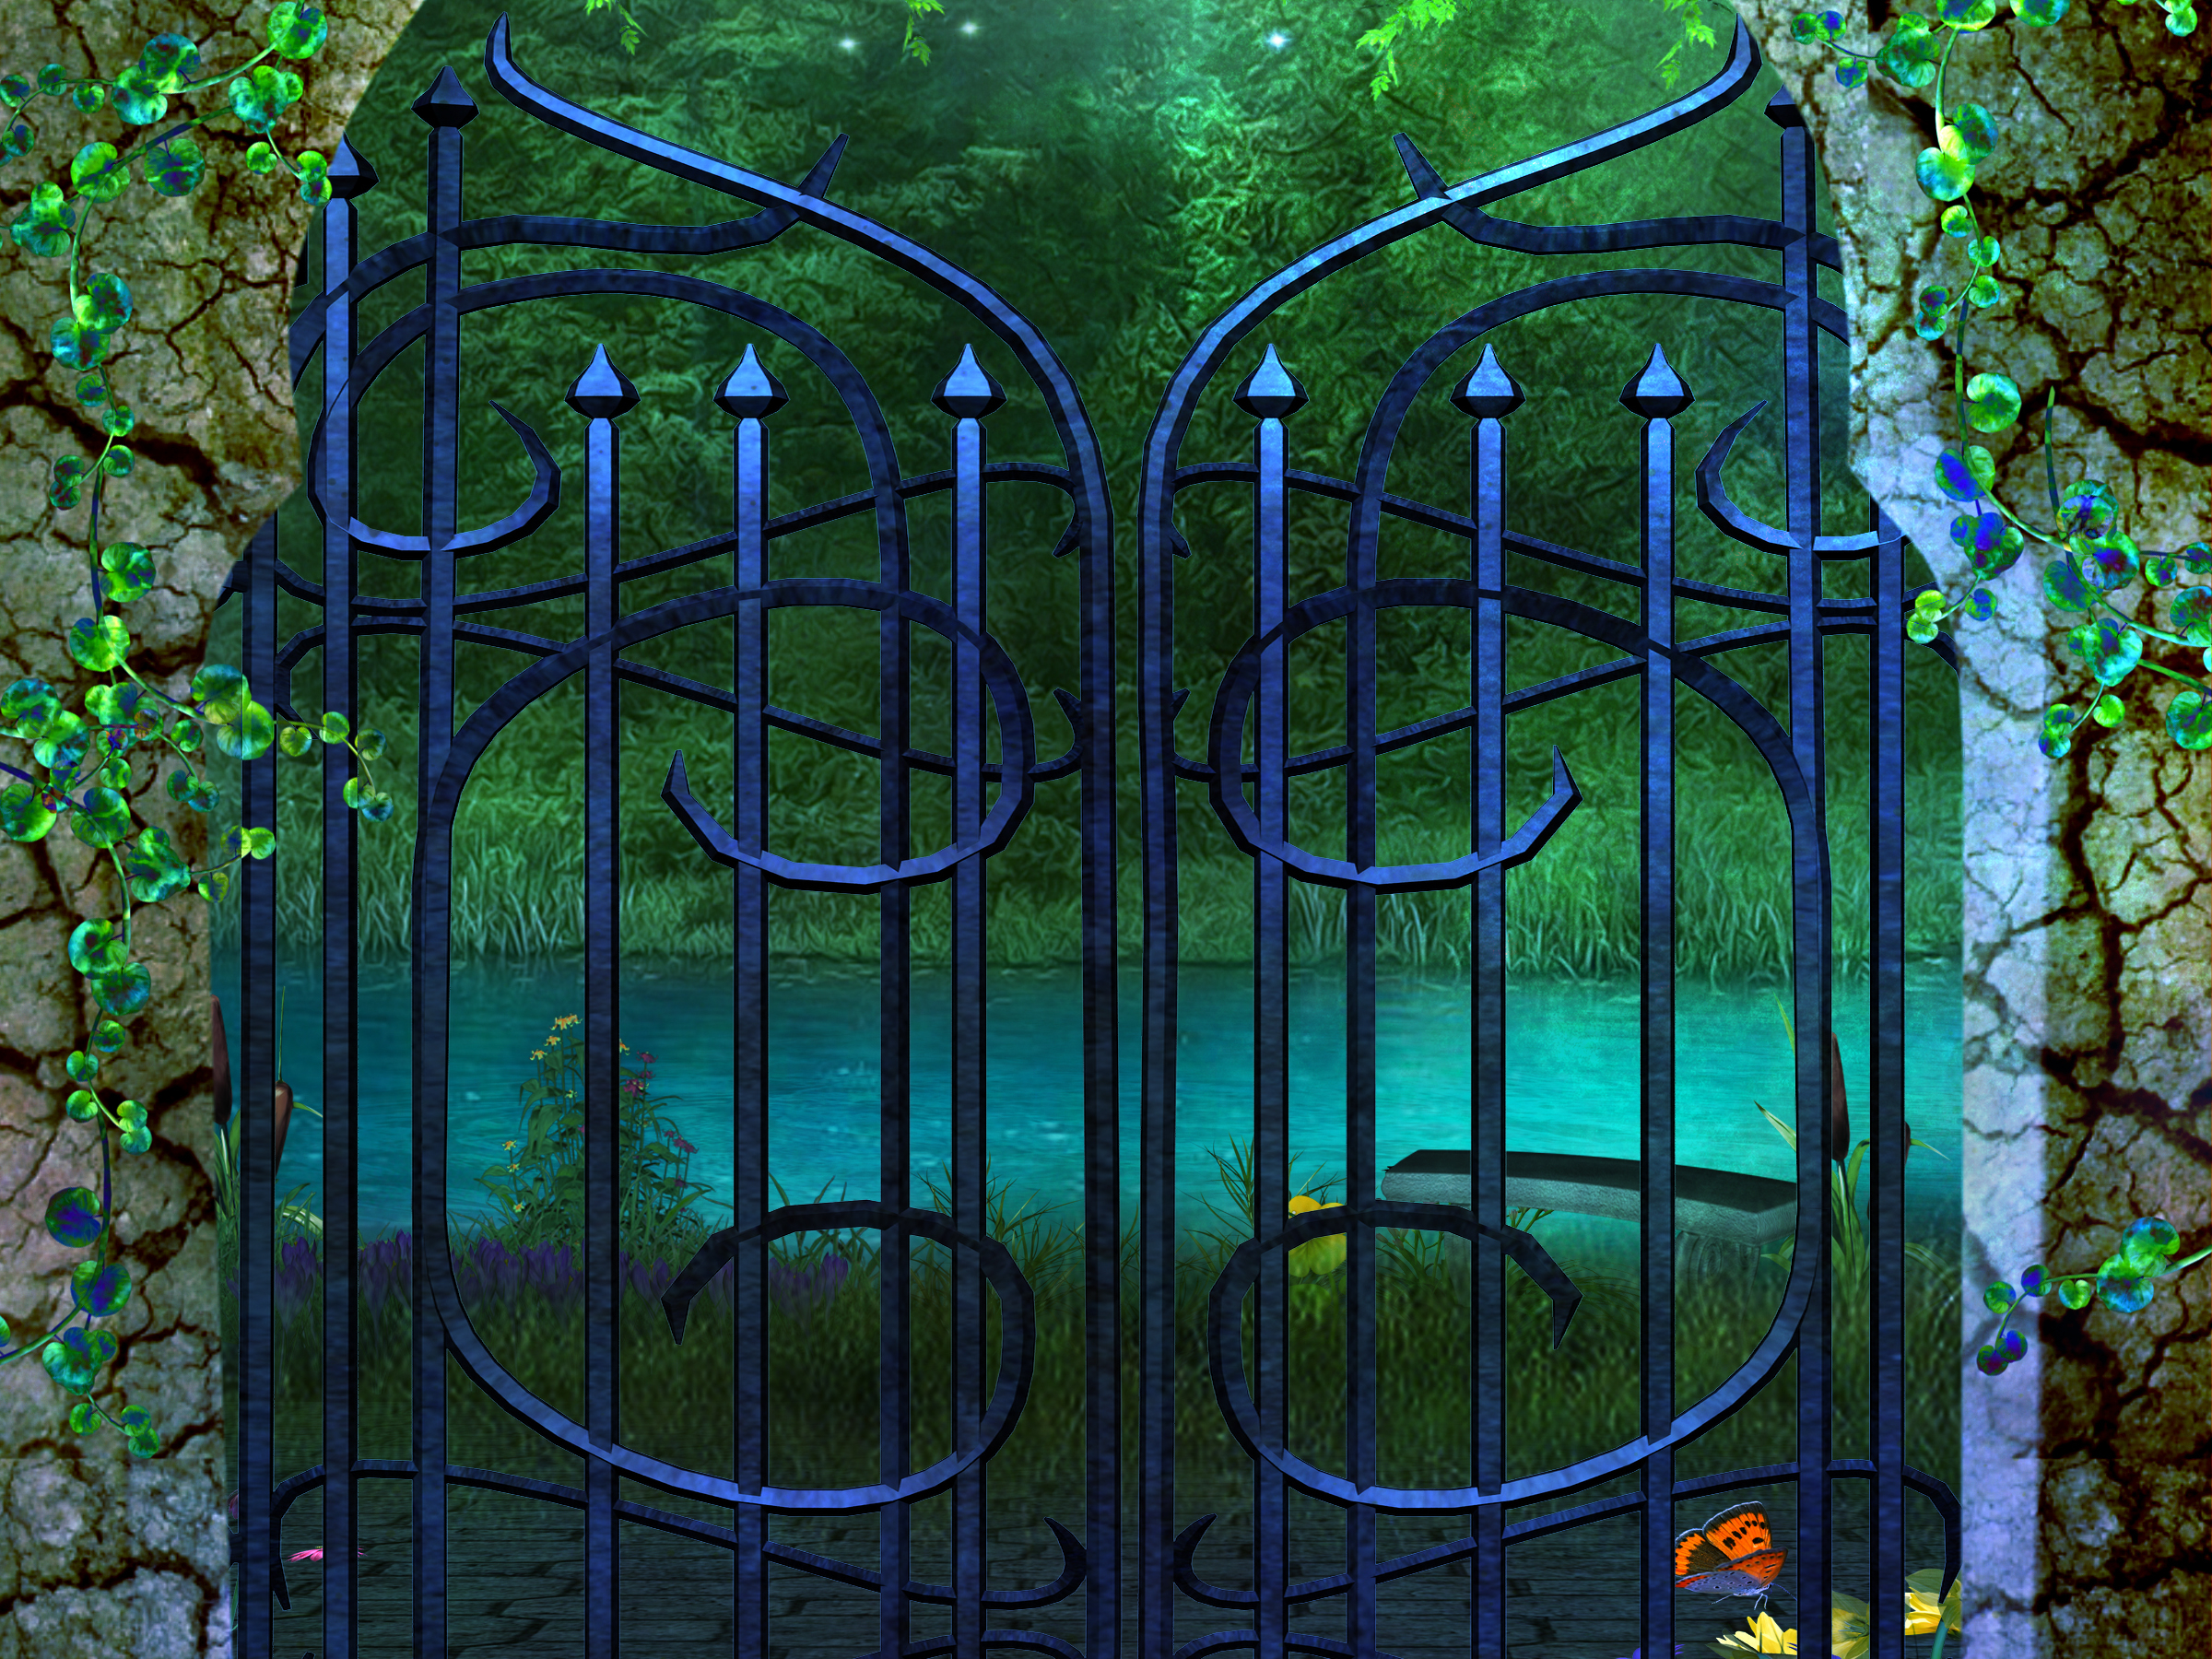 Gate to Fantasy Forest by ANDREA SURAJBALLY